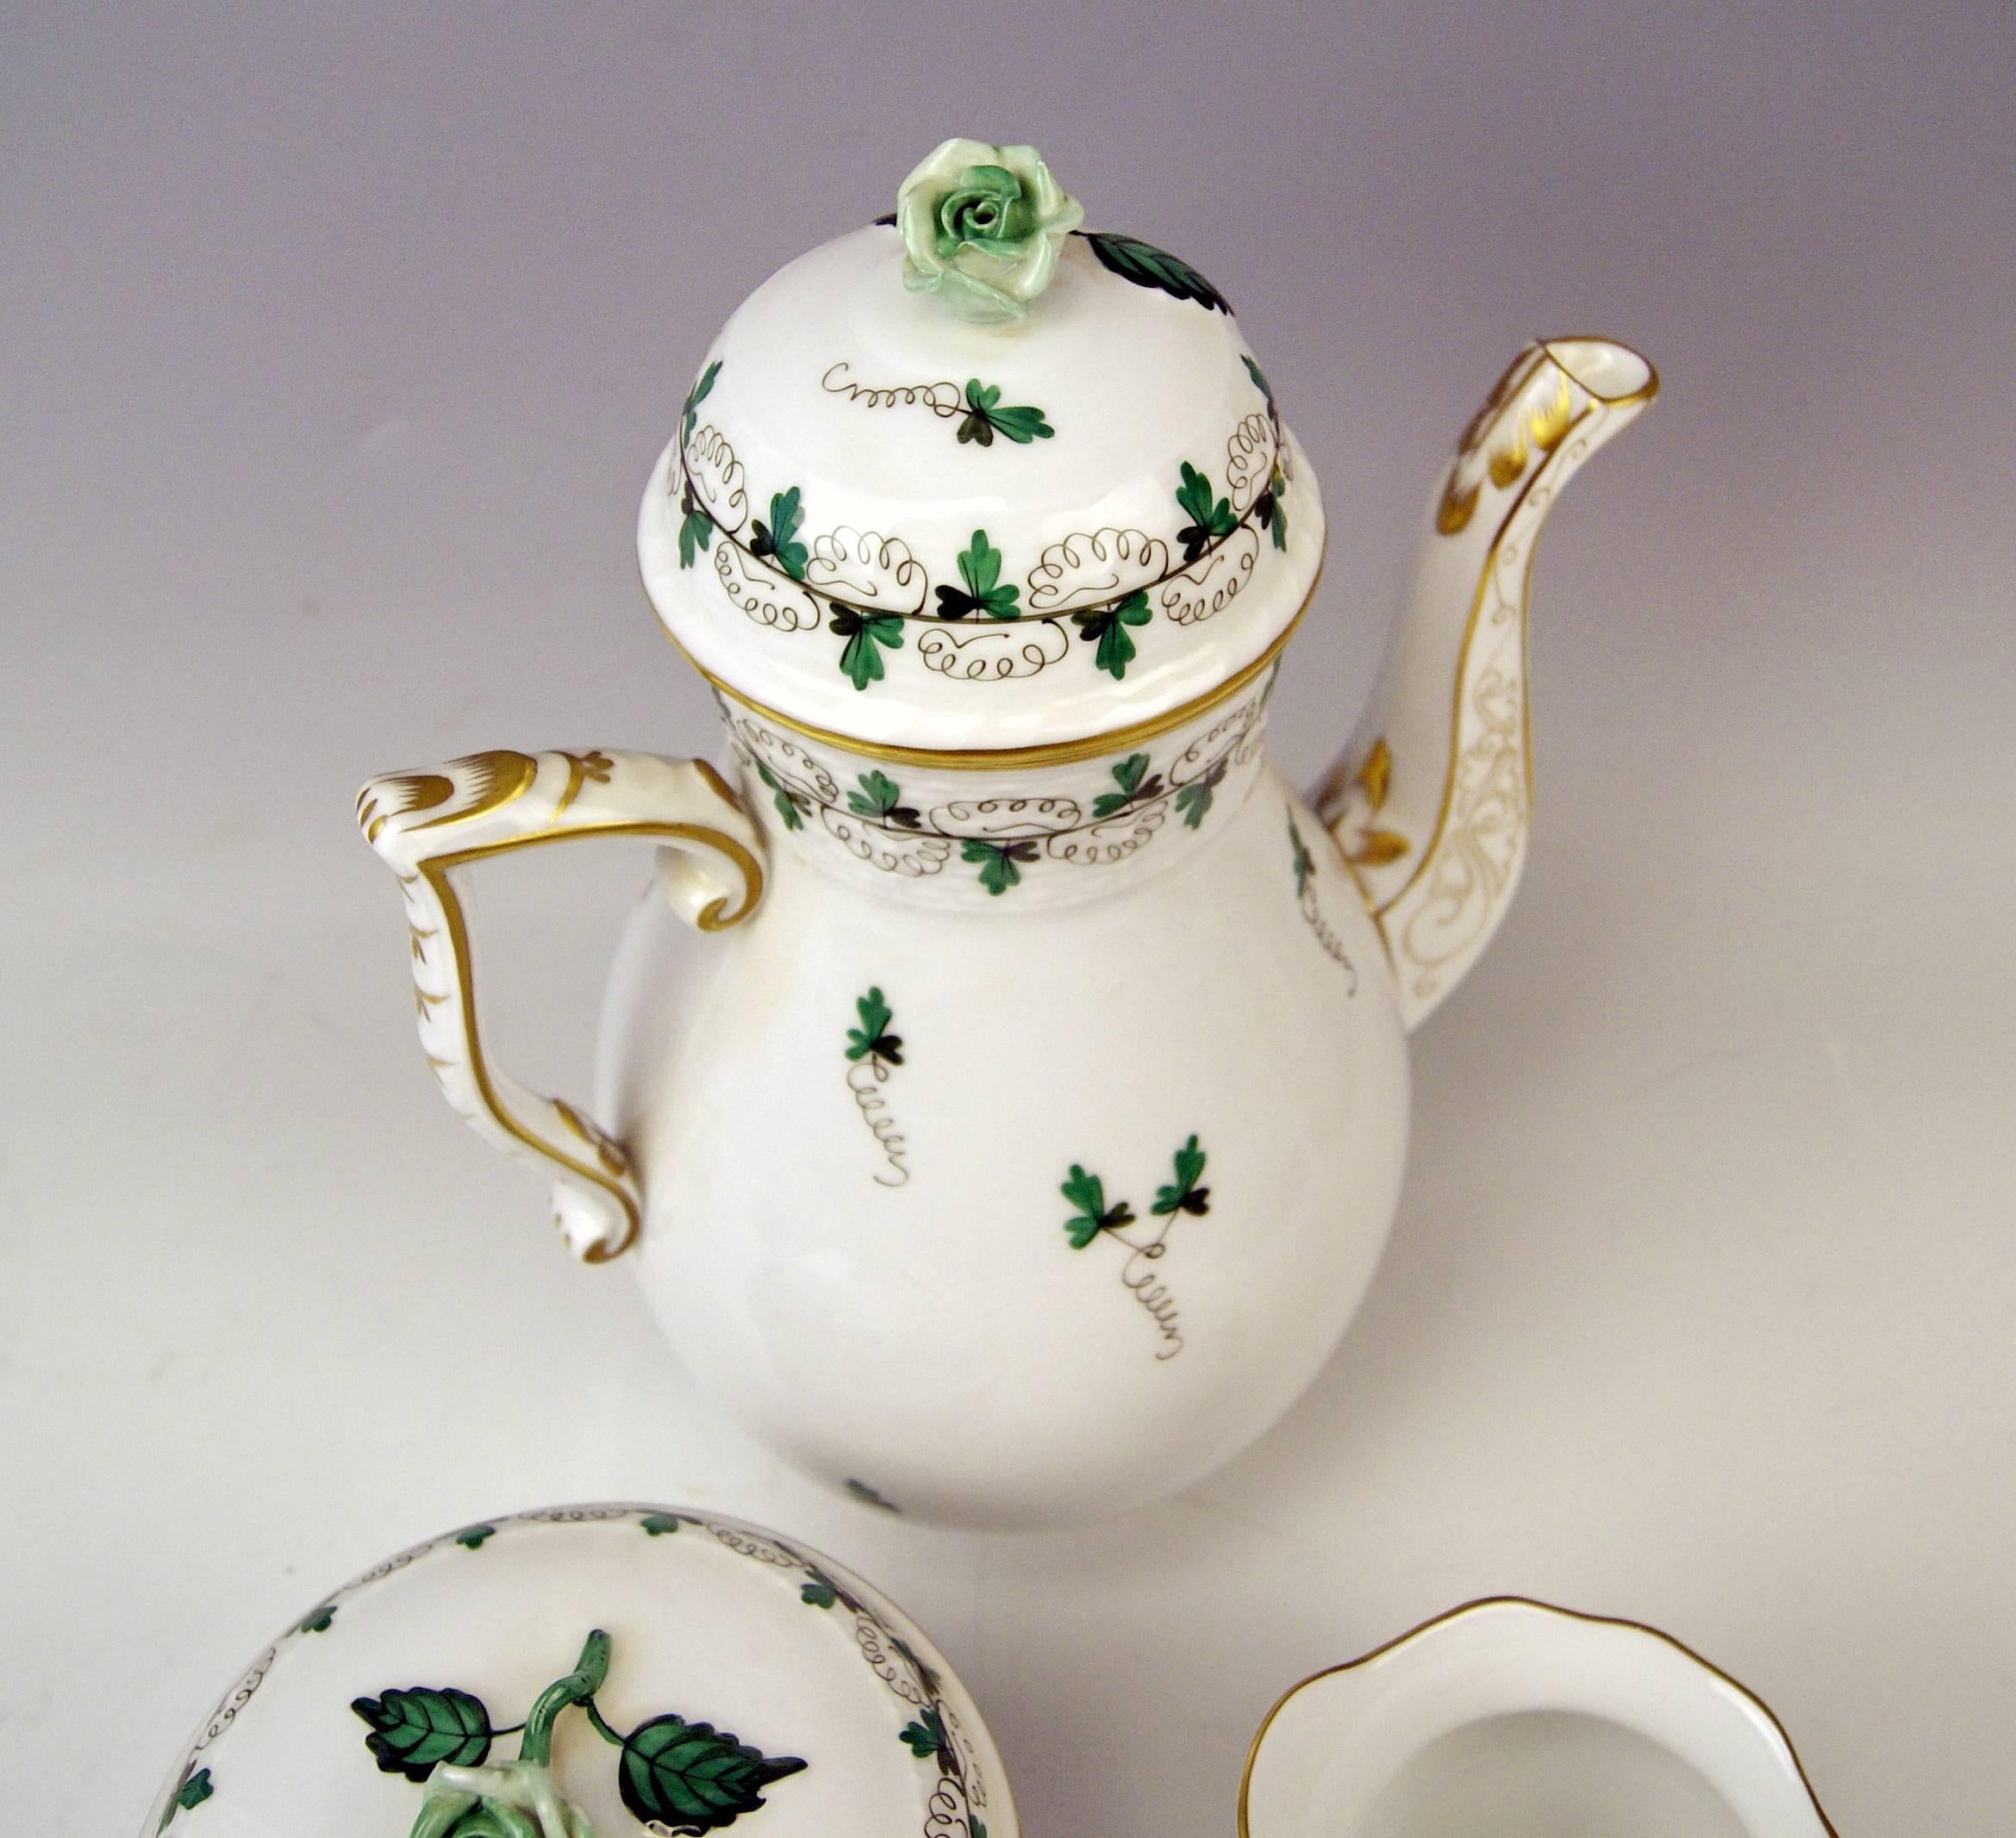 Painted Herend Coffee Set for Six Persons Decor Persil, circa 1960